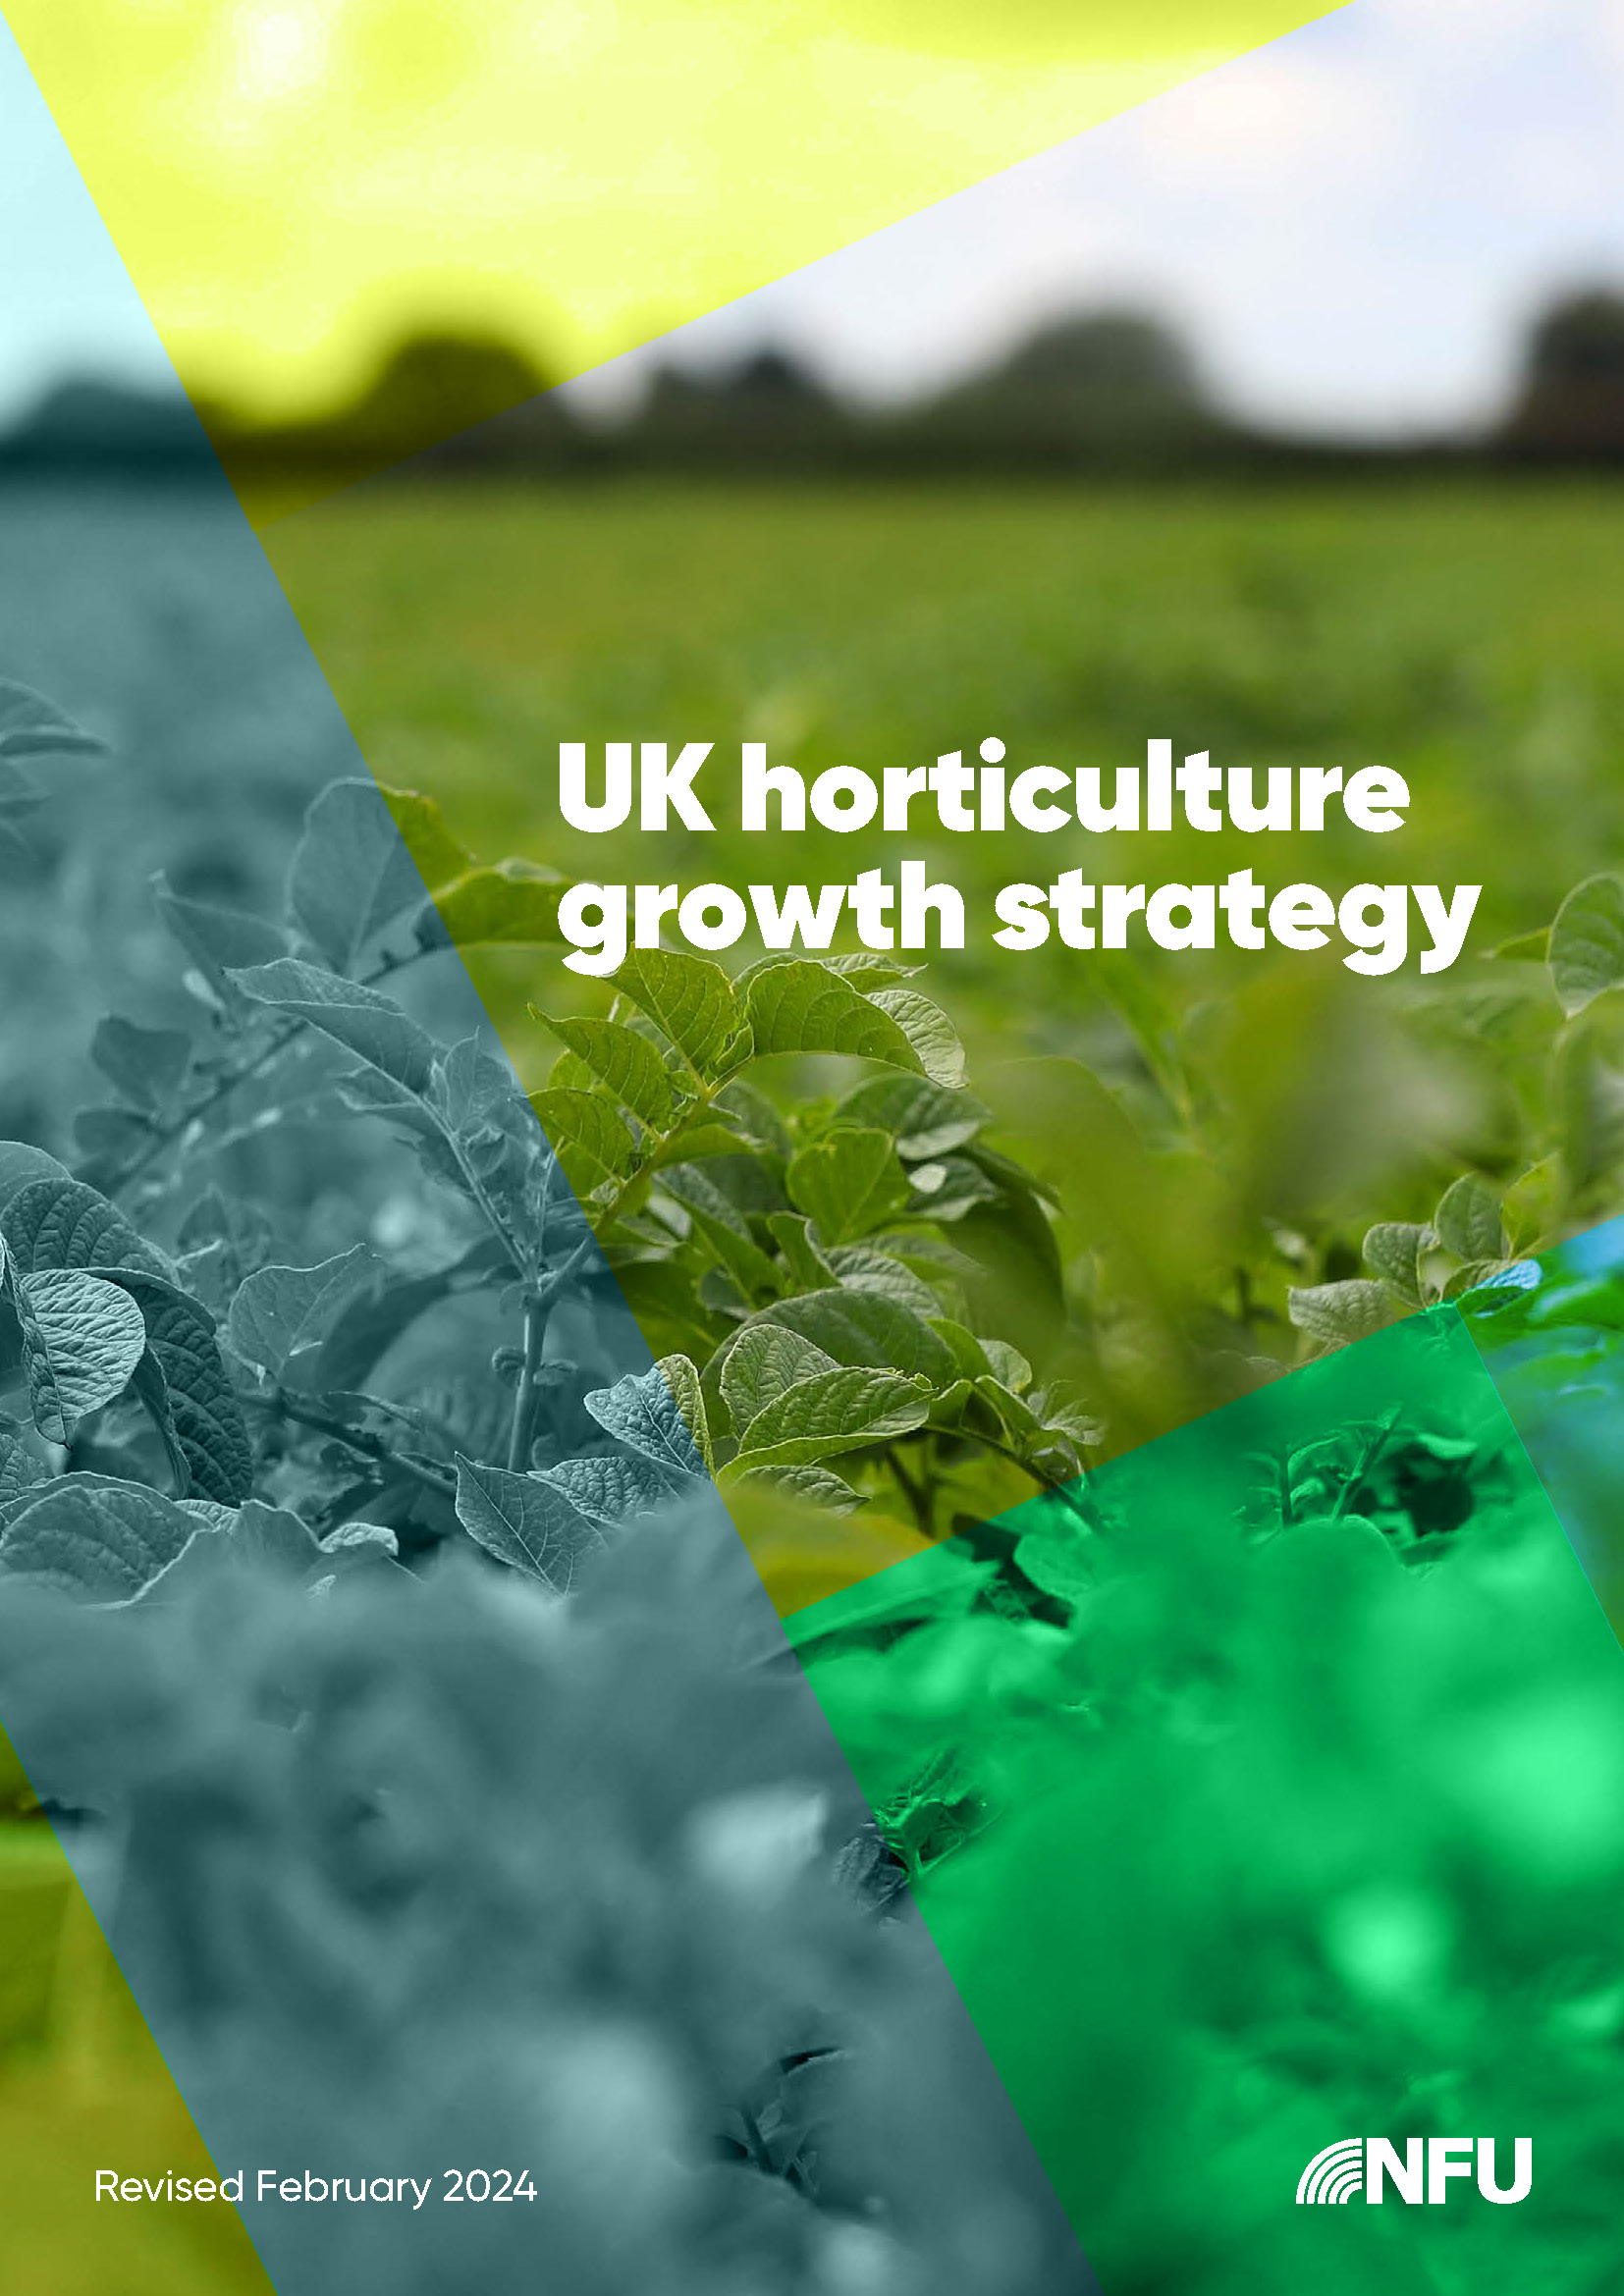 NFU UK horticulture growth strategy